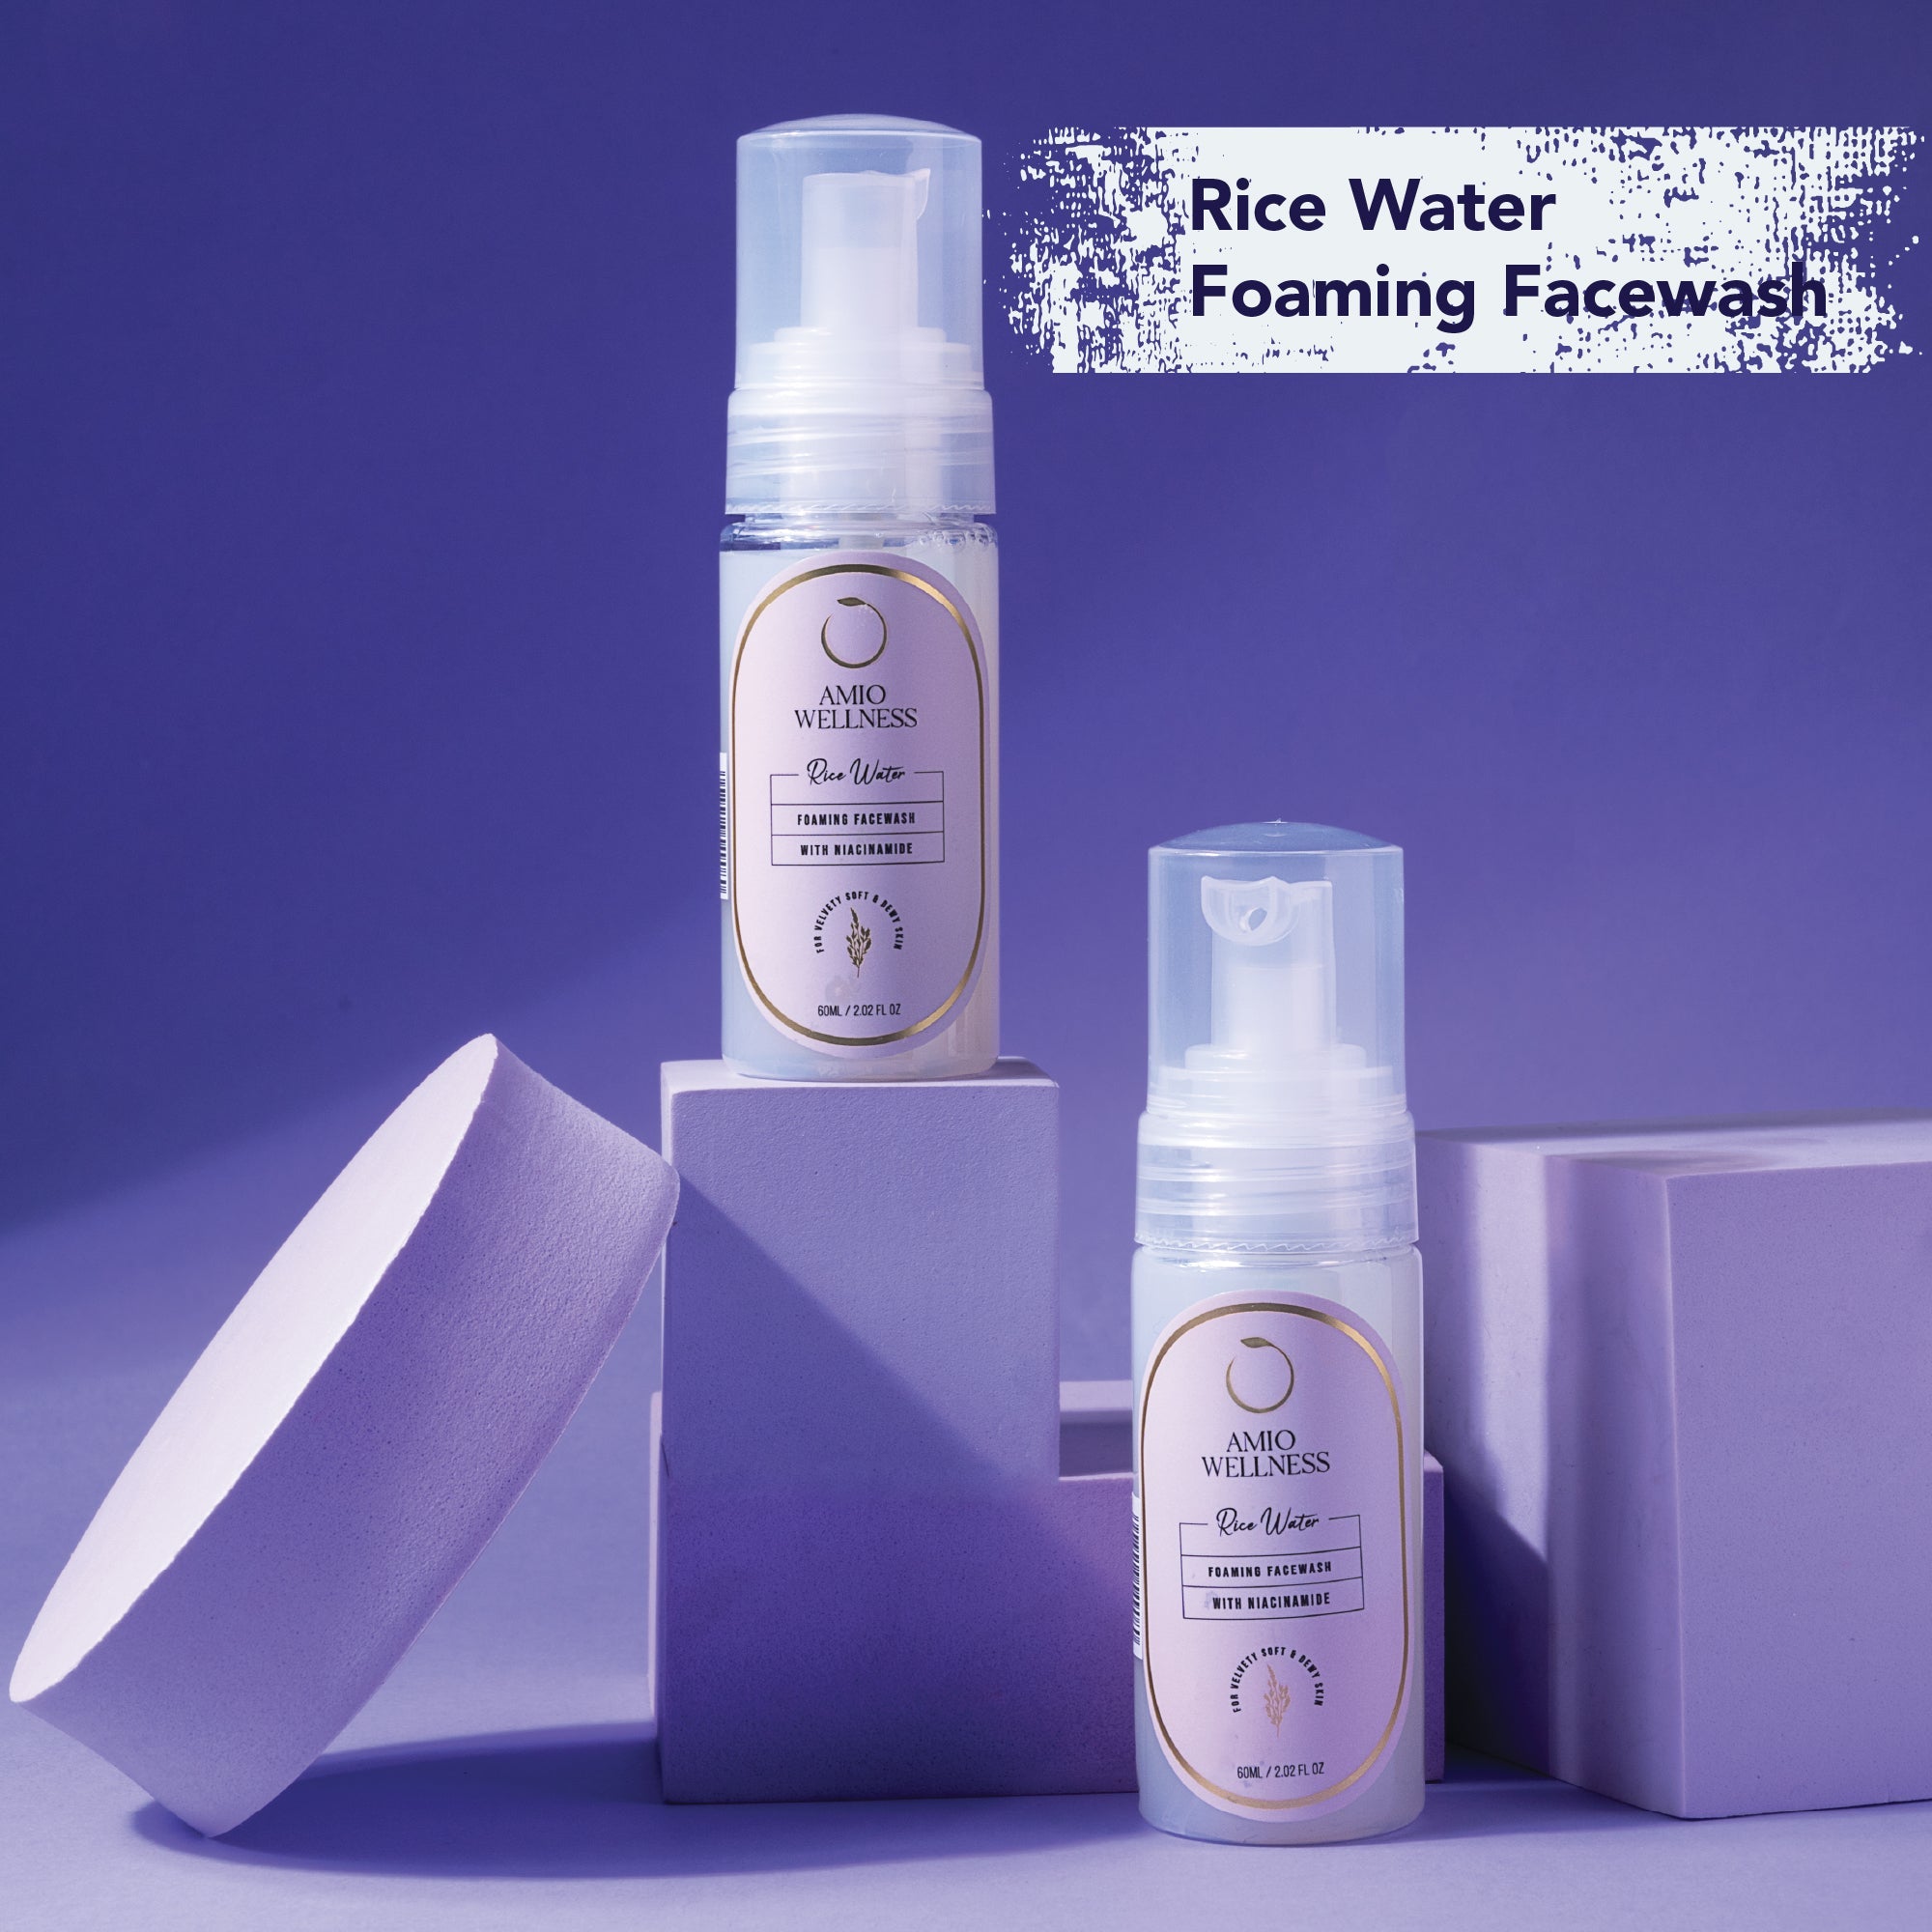 Skin purifying combo | Red Wine Sleeping Mask 50gm | Ricewater foaming facewash with Salicylic acid 60ml | Pack of 2